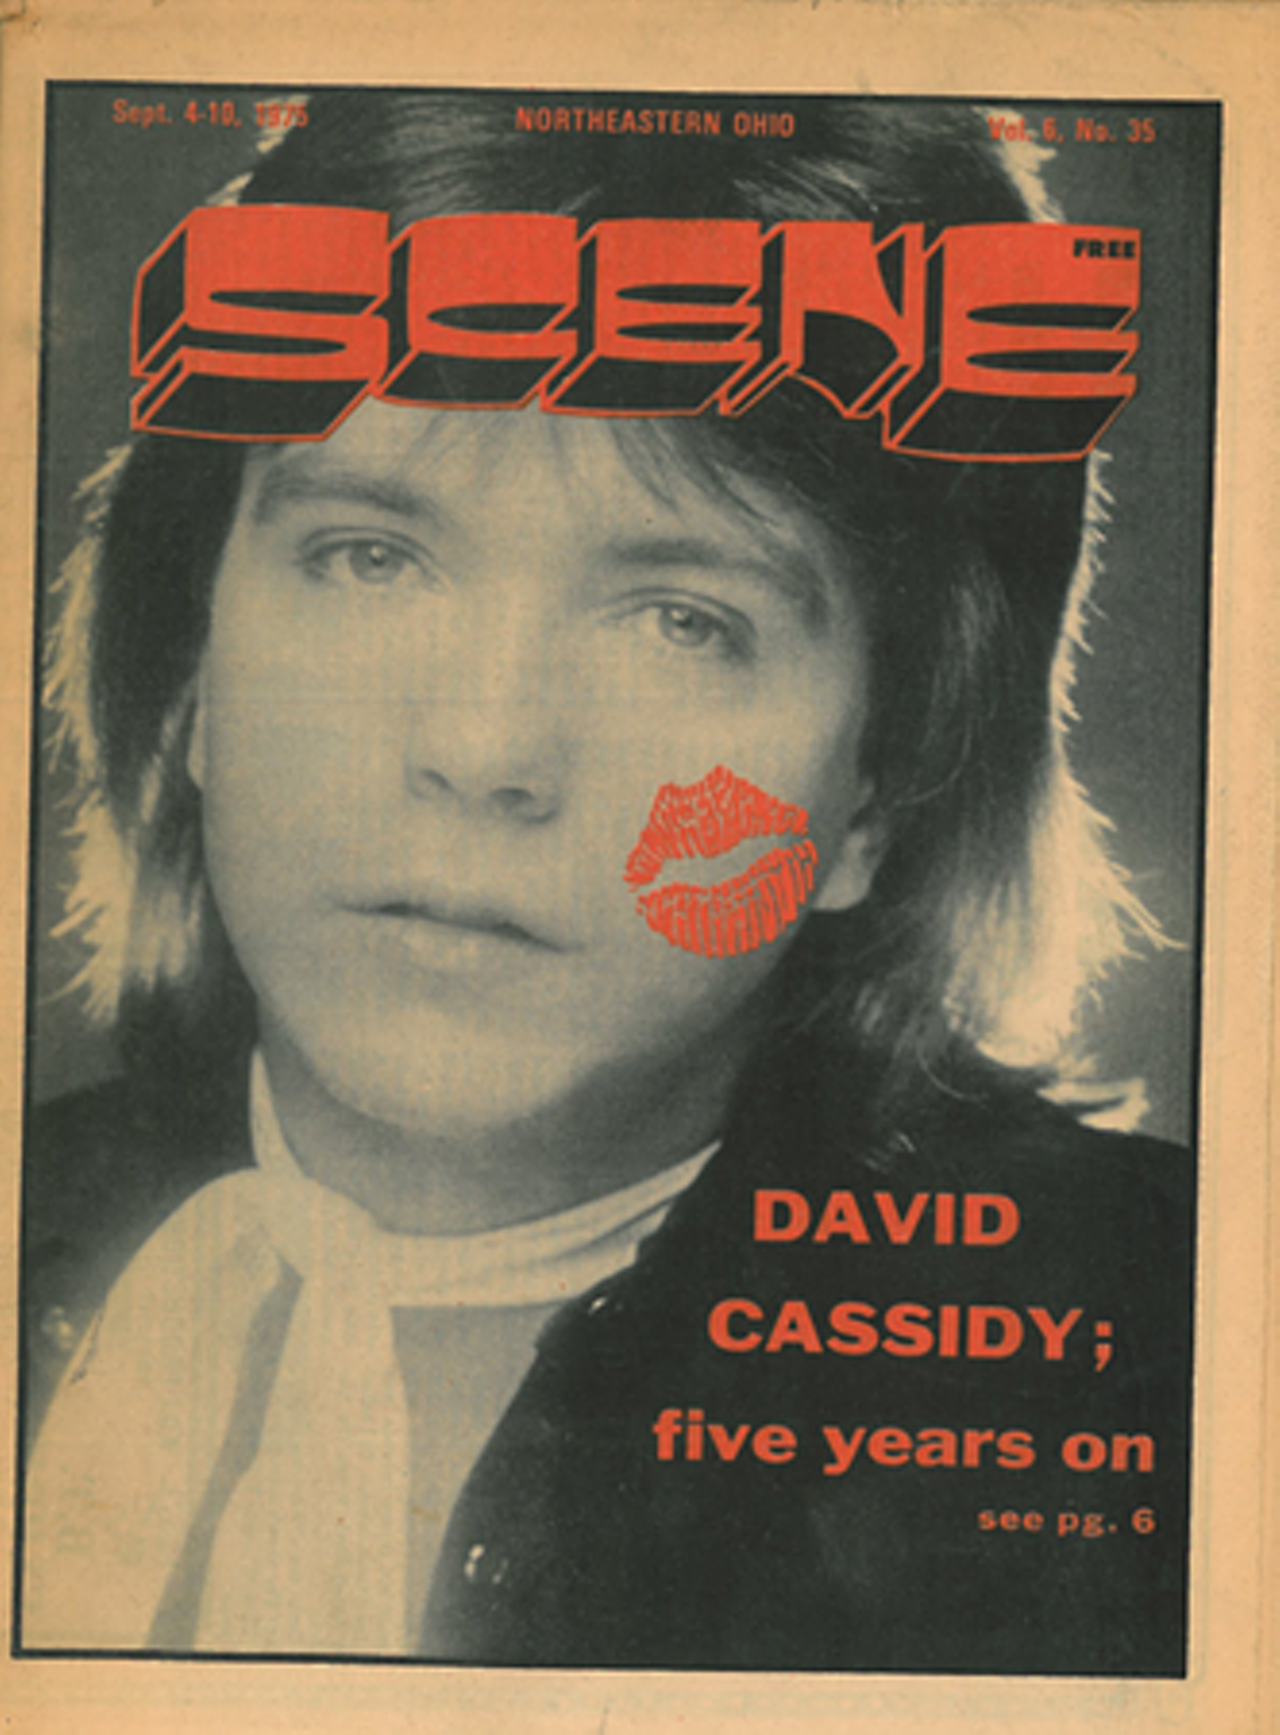 David Cassidy; five years on, 1975